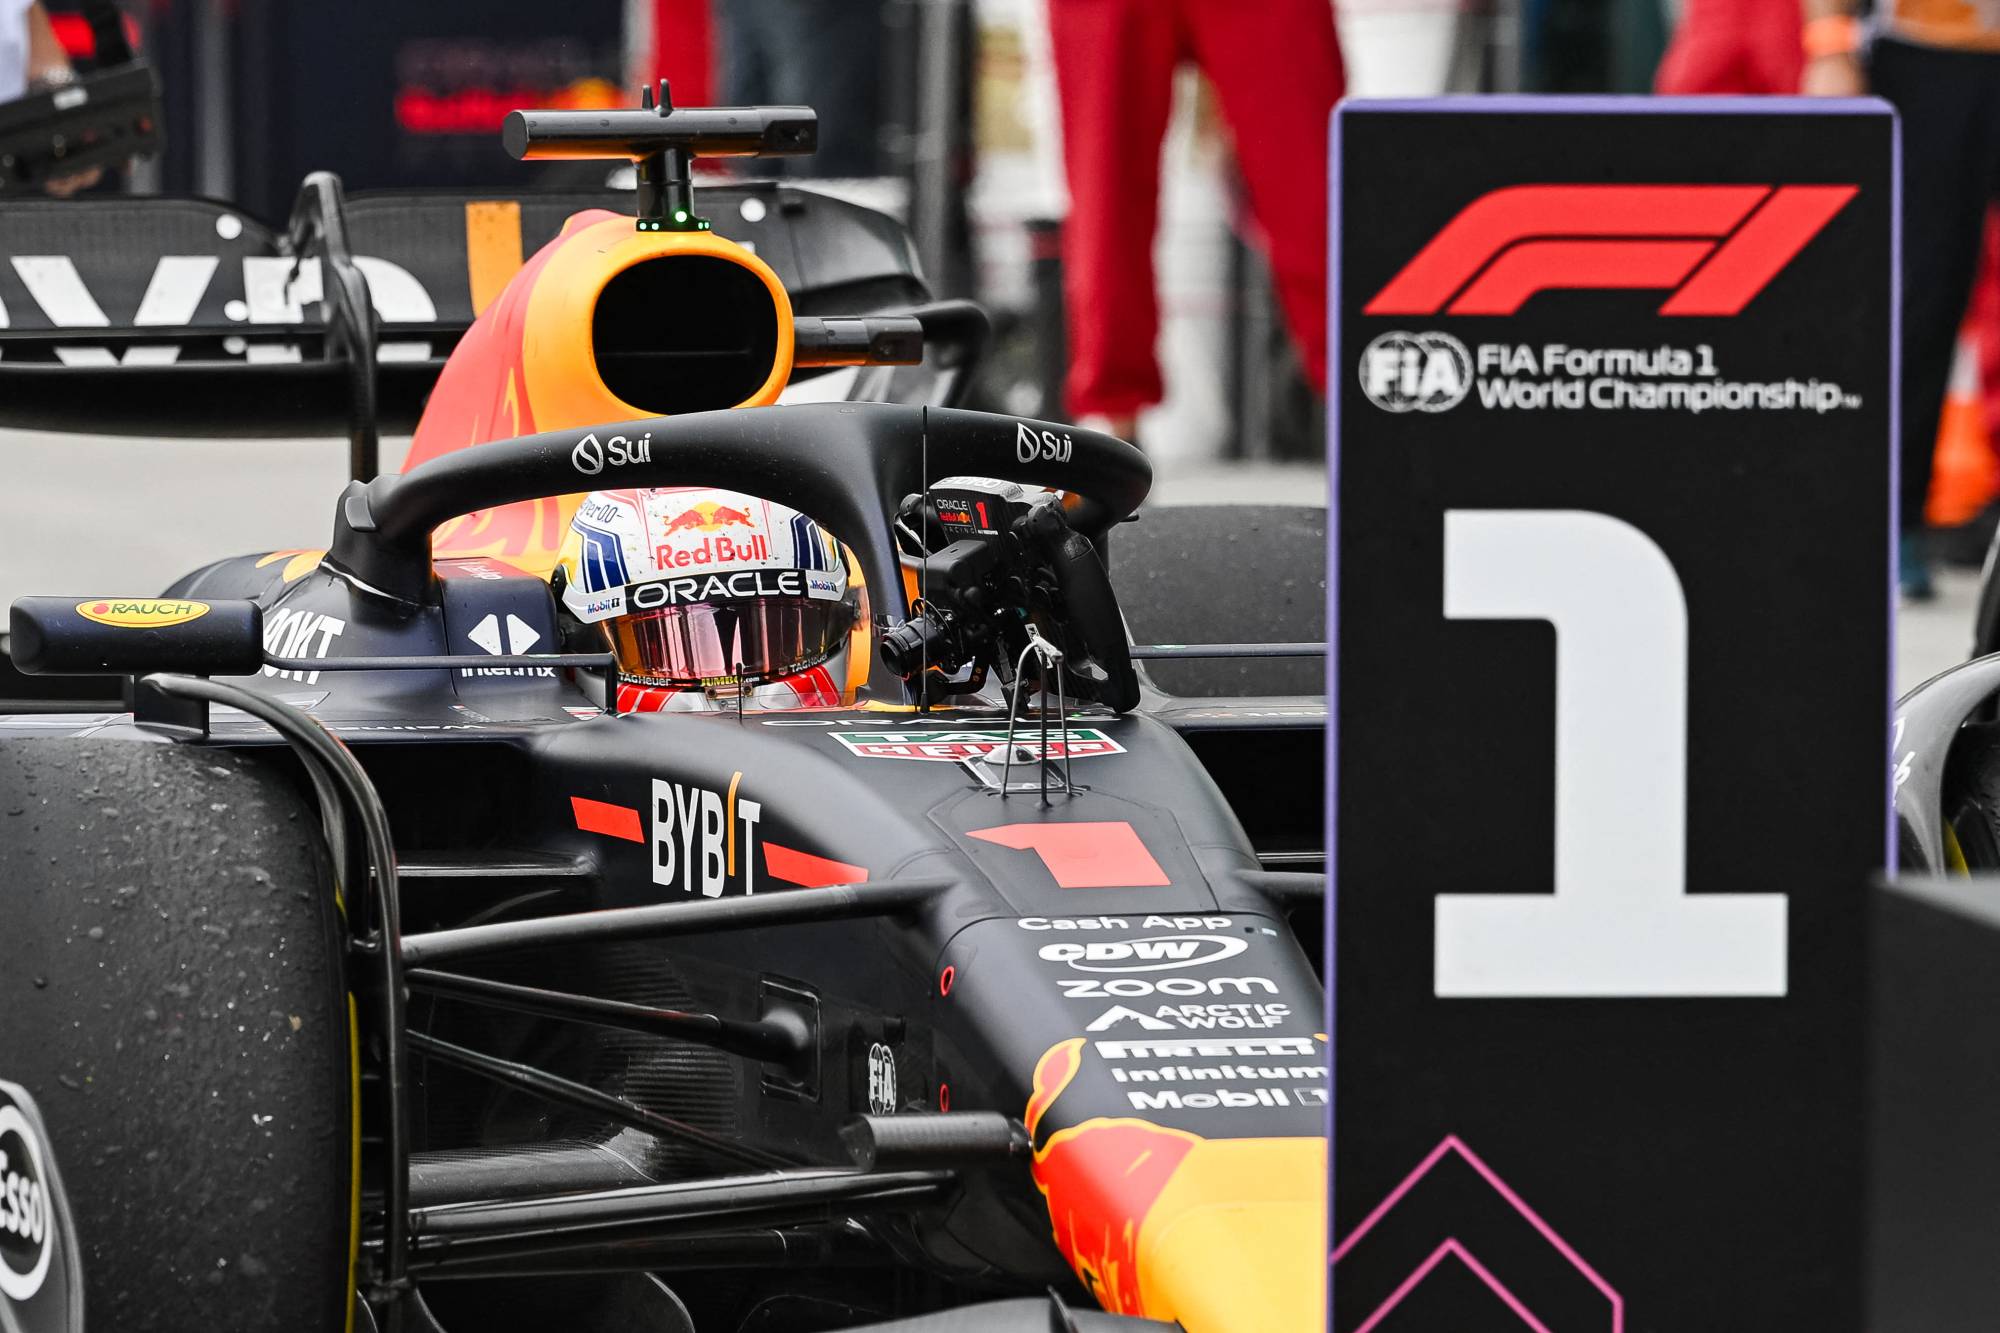 Why will Red Bull pay a historic entry fee in F1 next season?